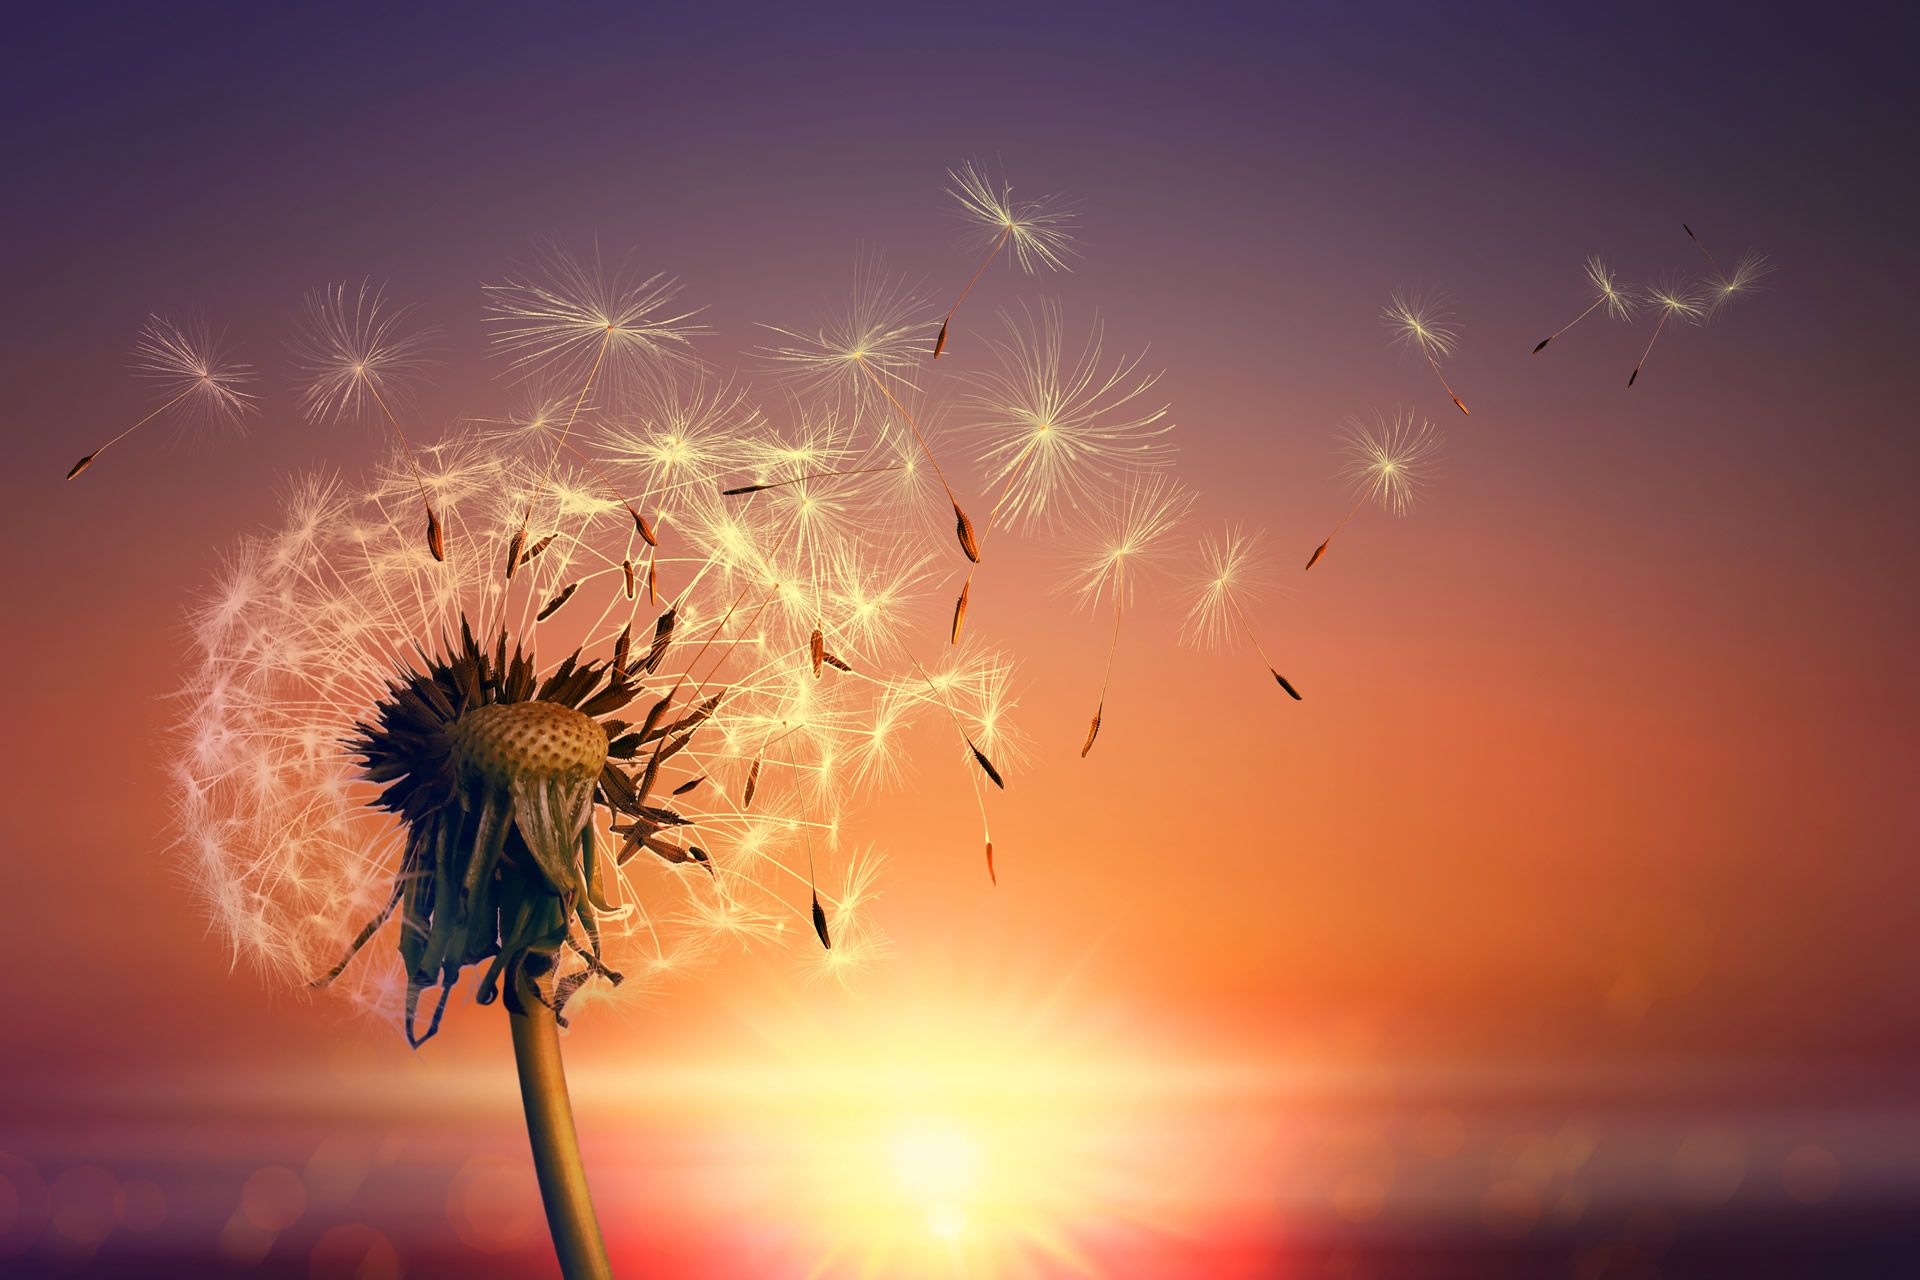 A dandelion flower against a sunrise with the seeds blowing in the air